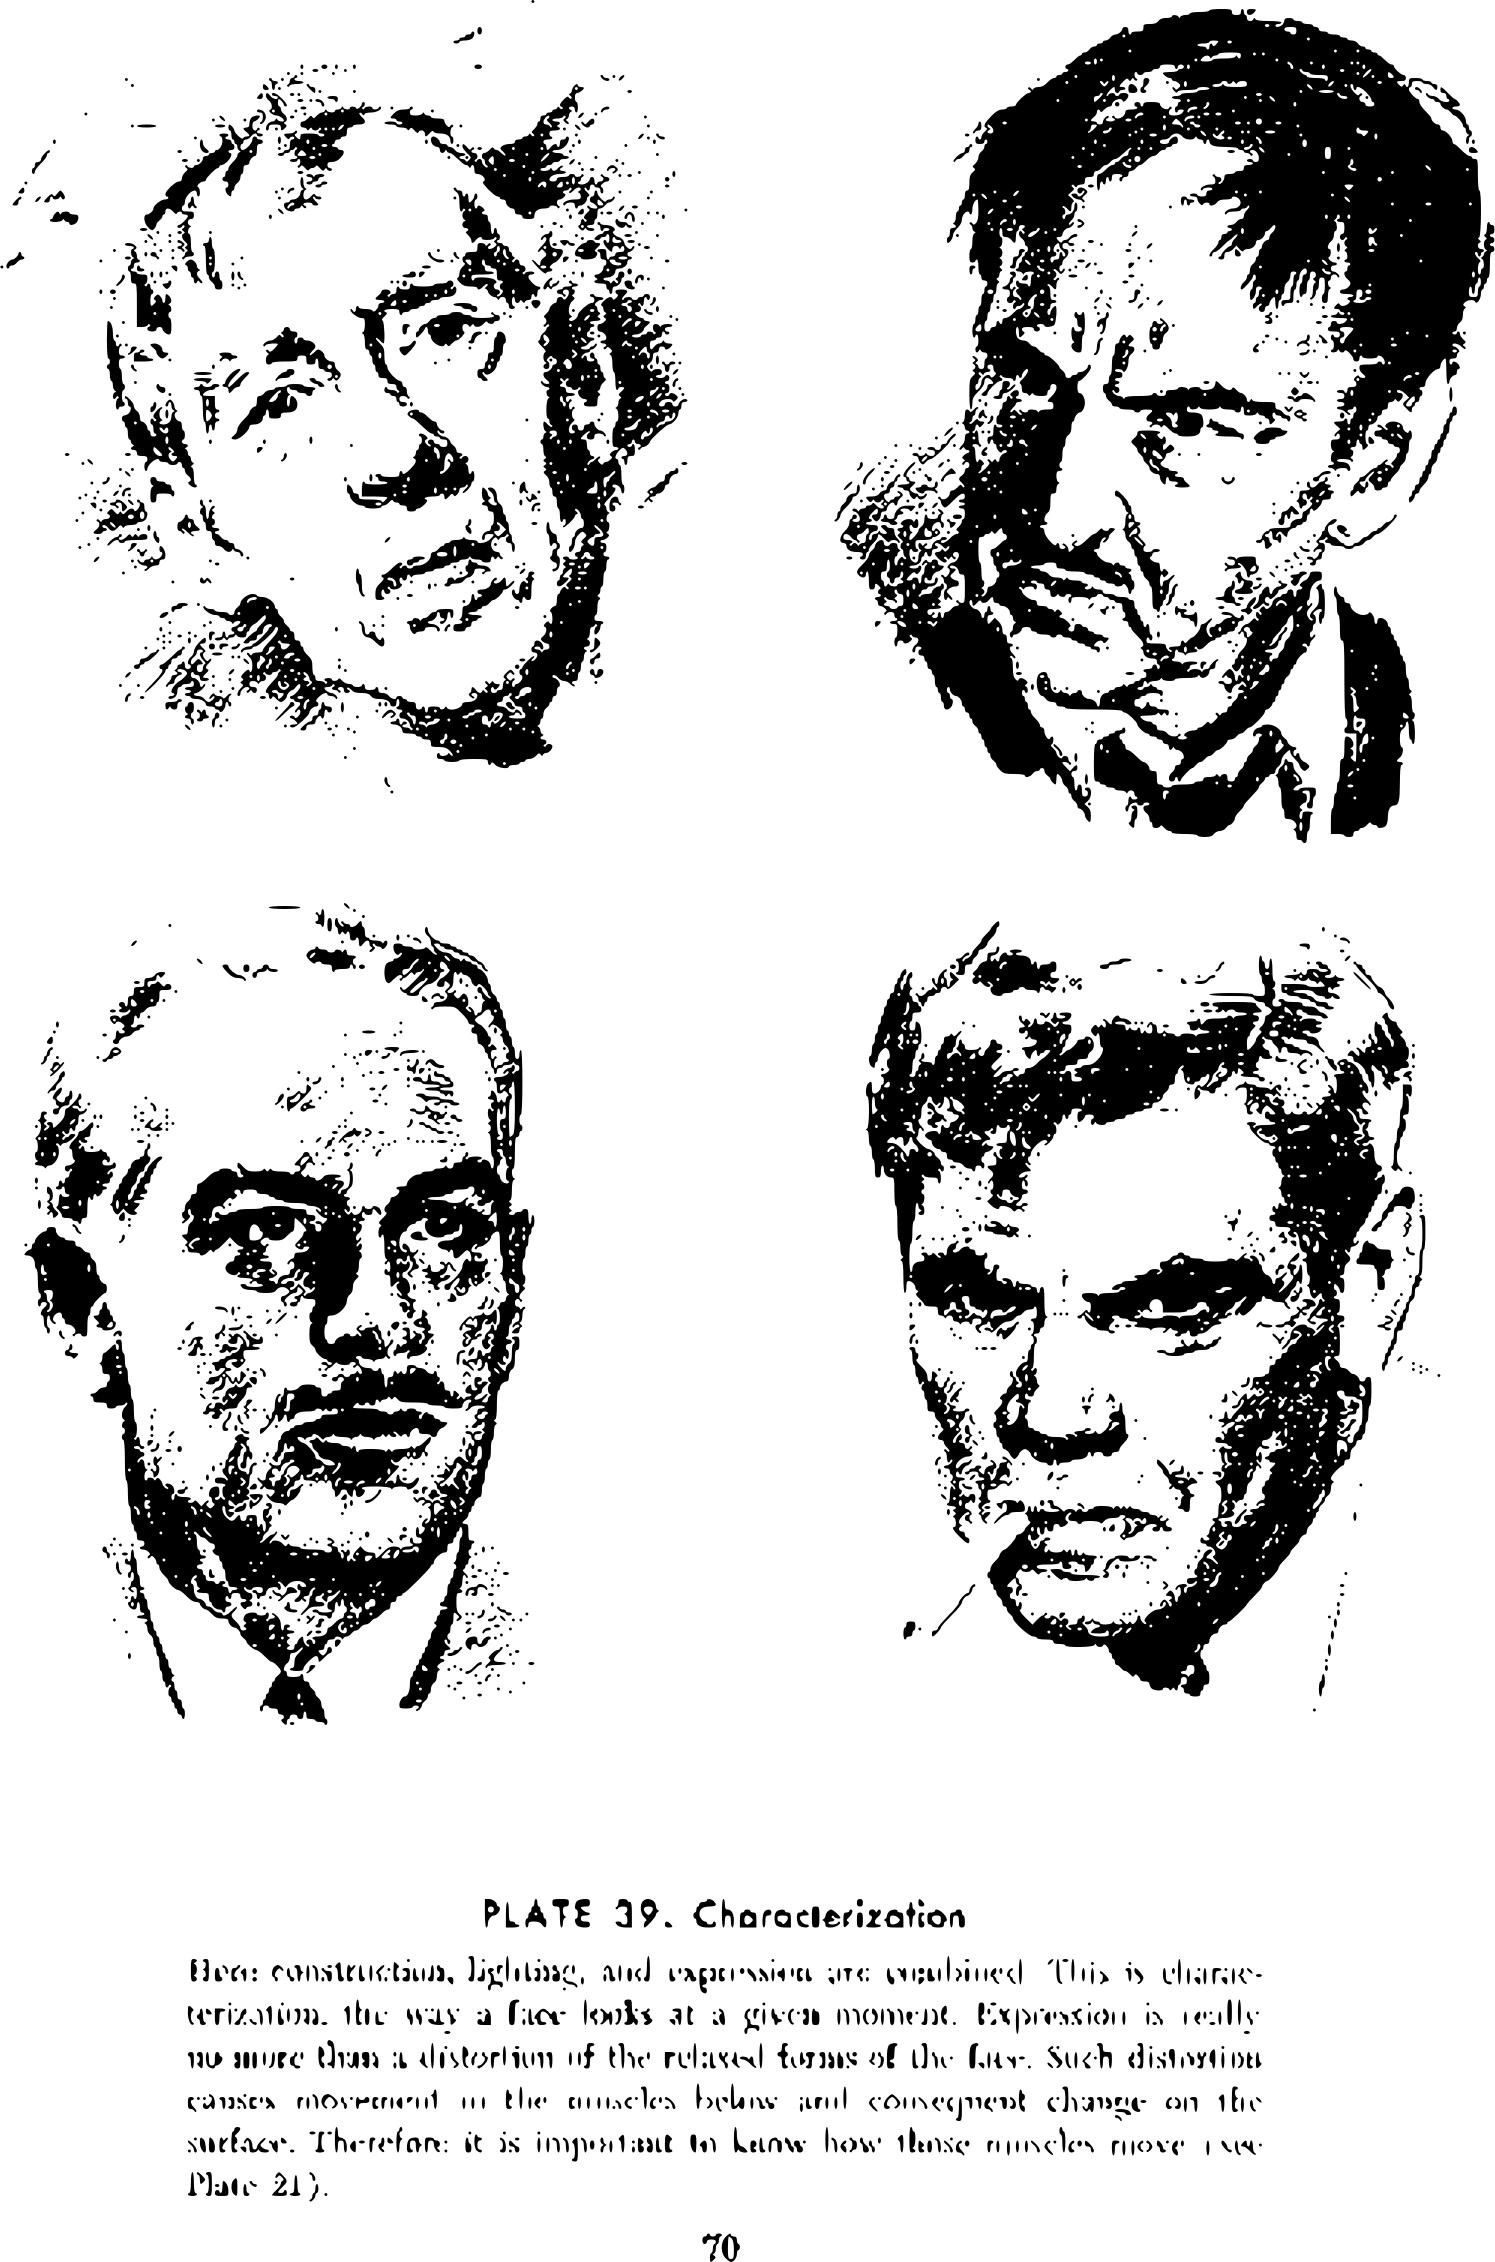 Andrew Loomis Drawing the Head and Hands icons